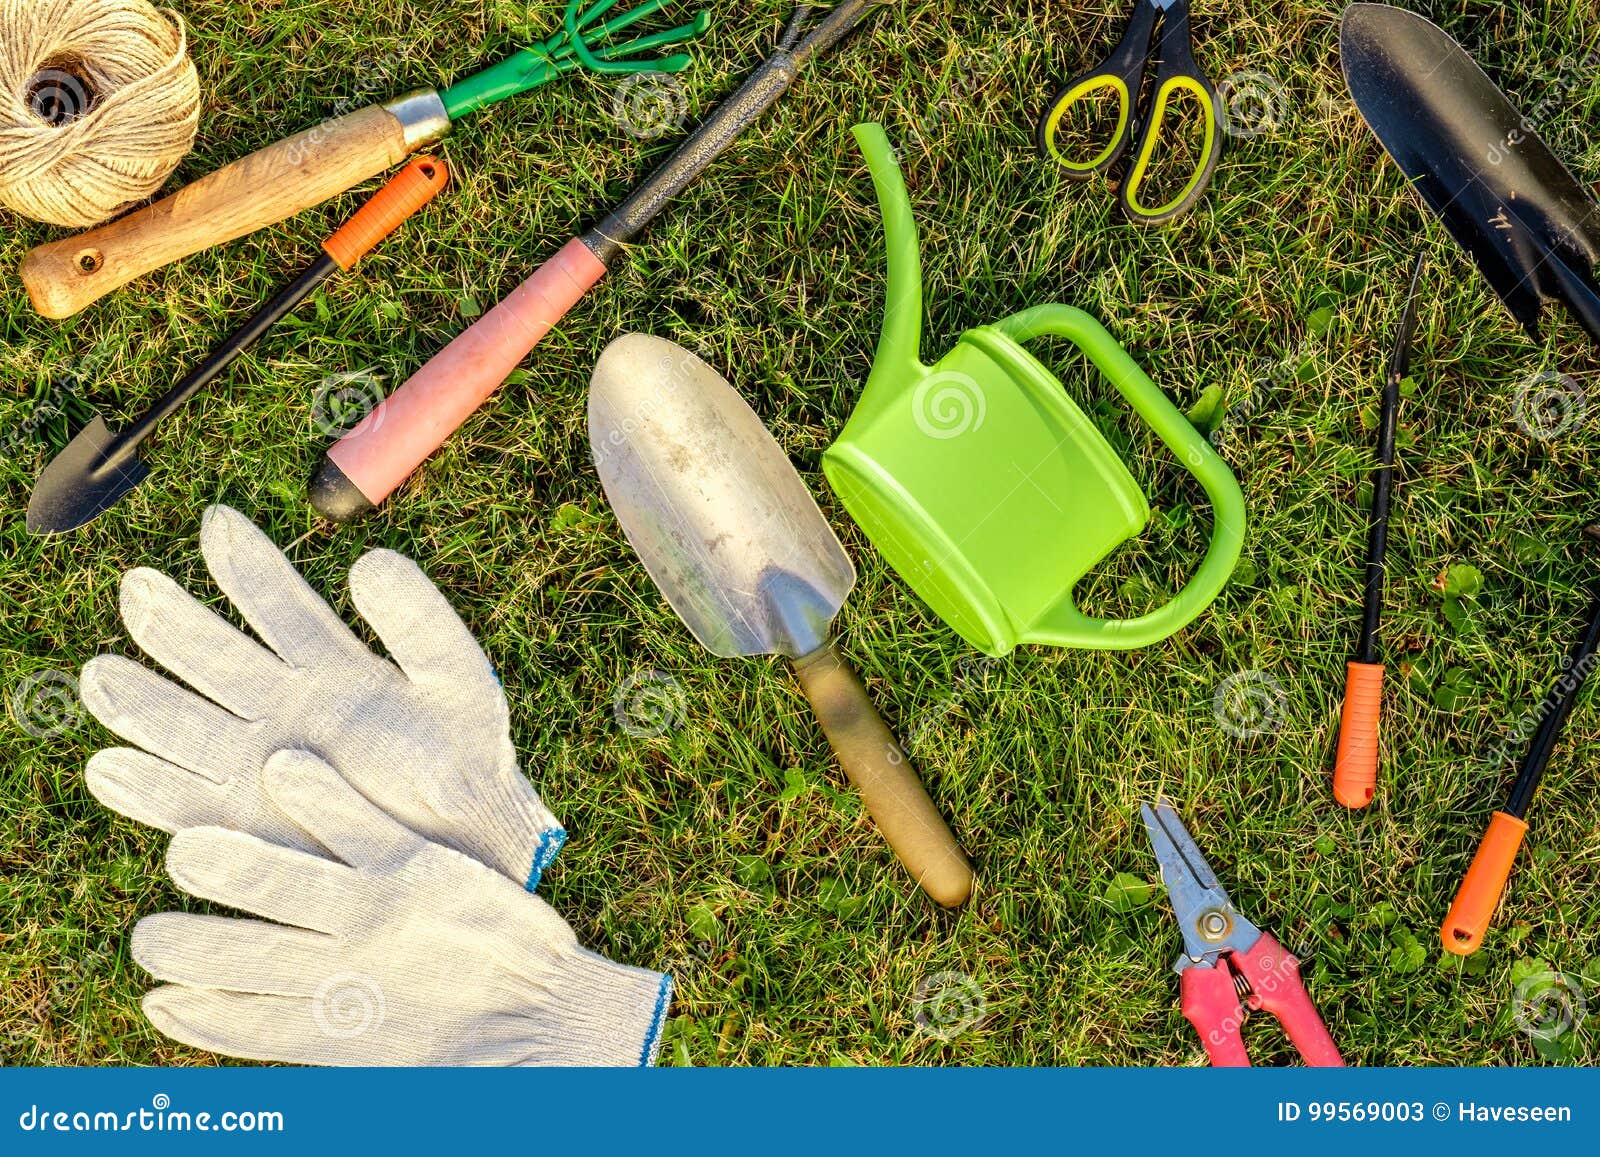 Gardening Tools and Watering Can on Grass Stock Image - Image of field ...